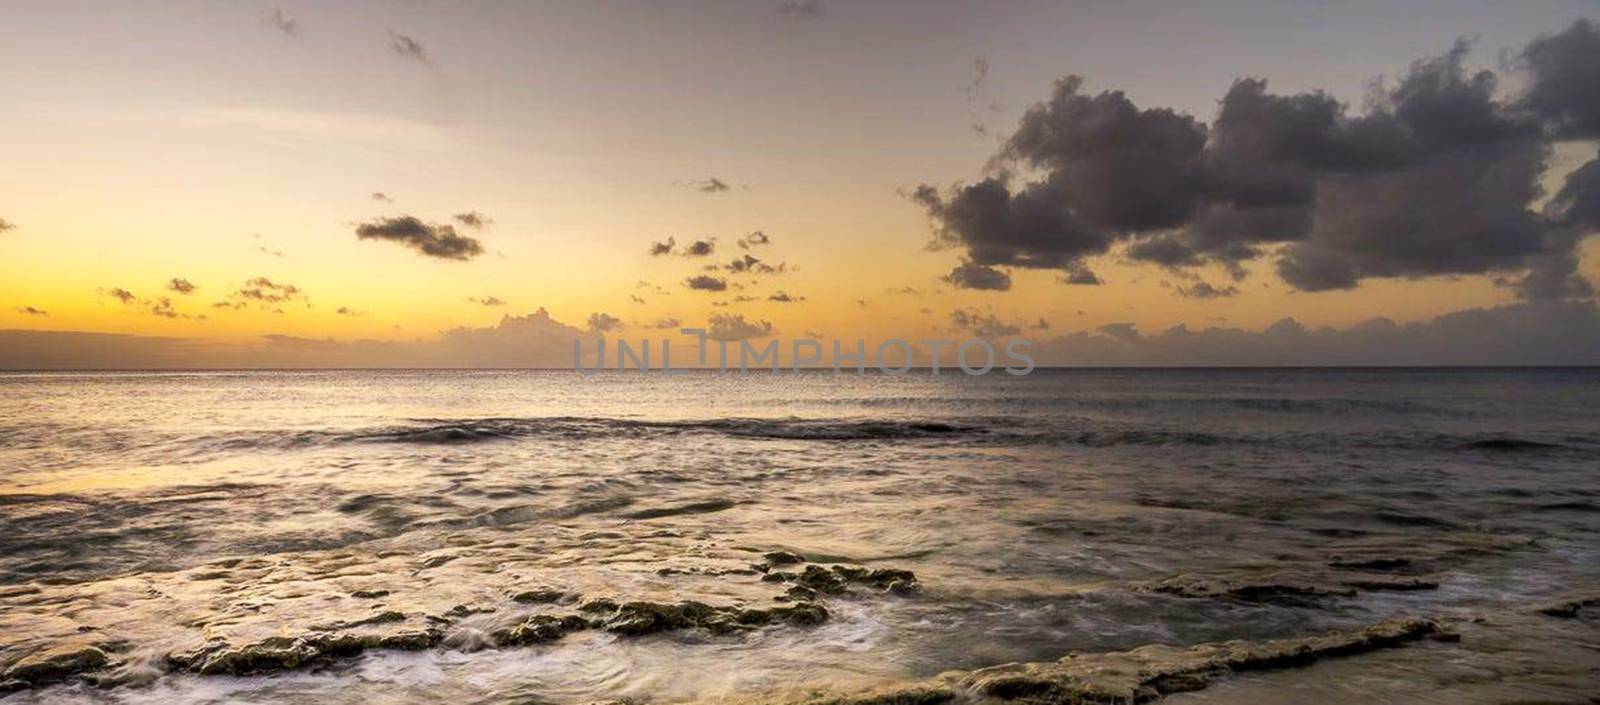 Beautiful pictures of  Barbados